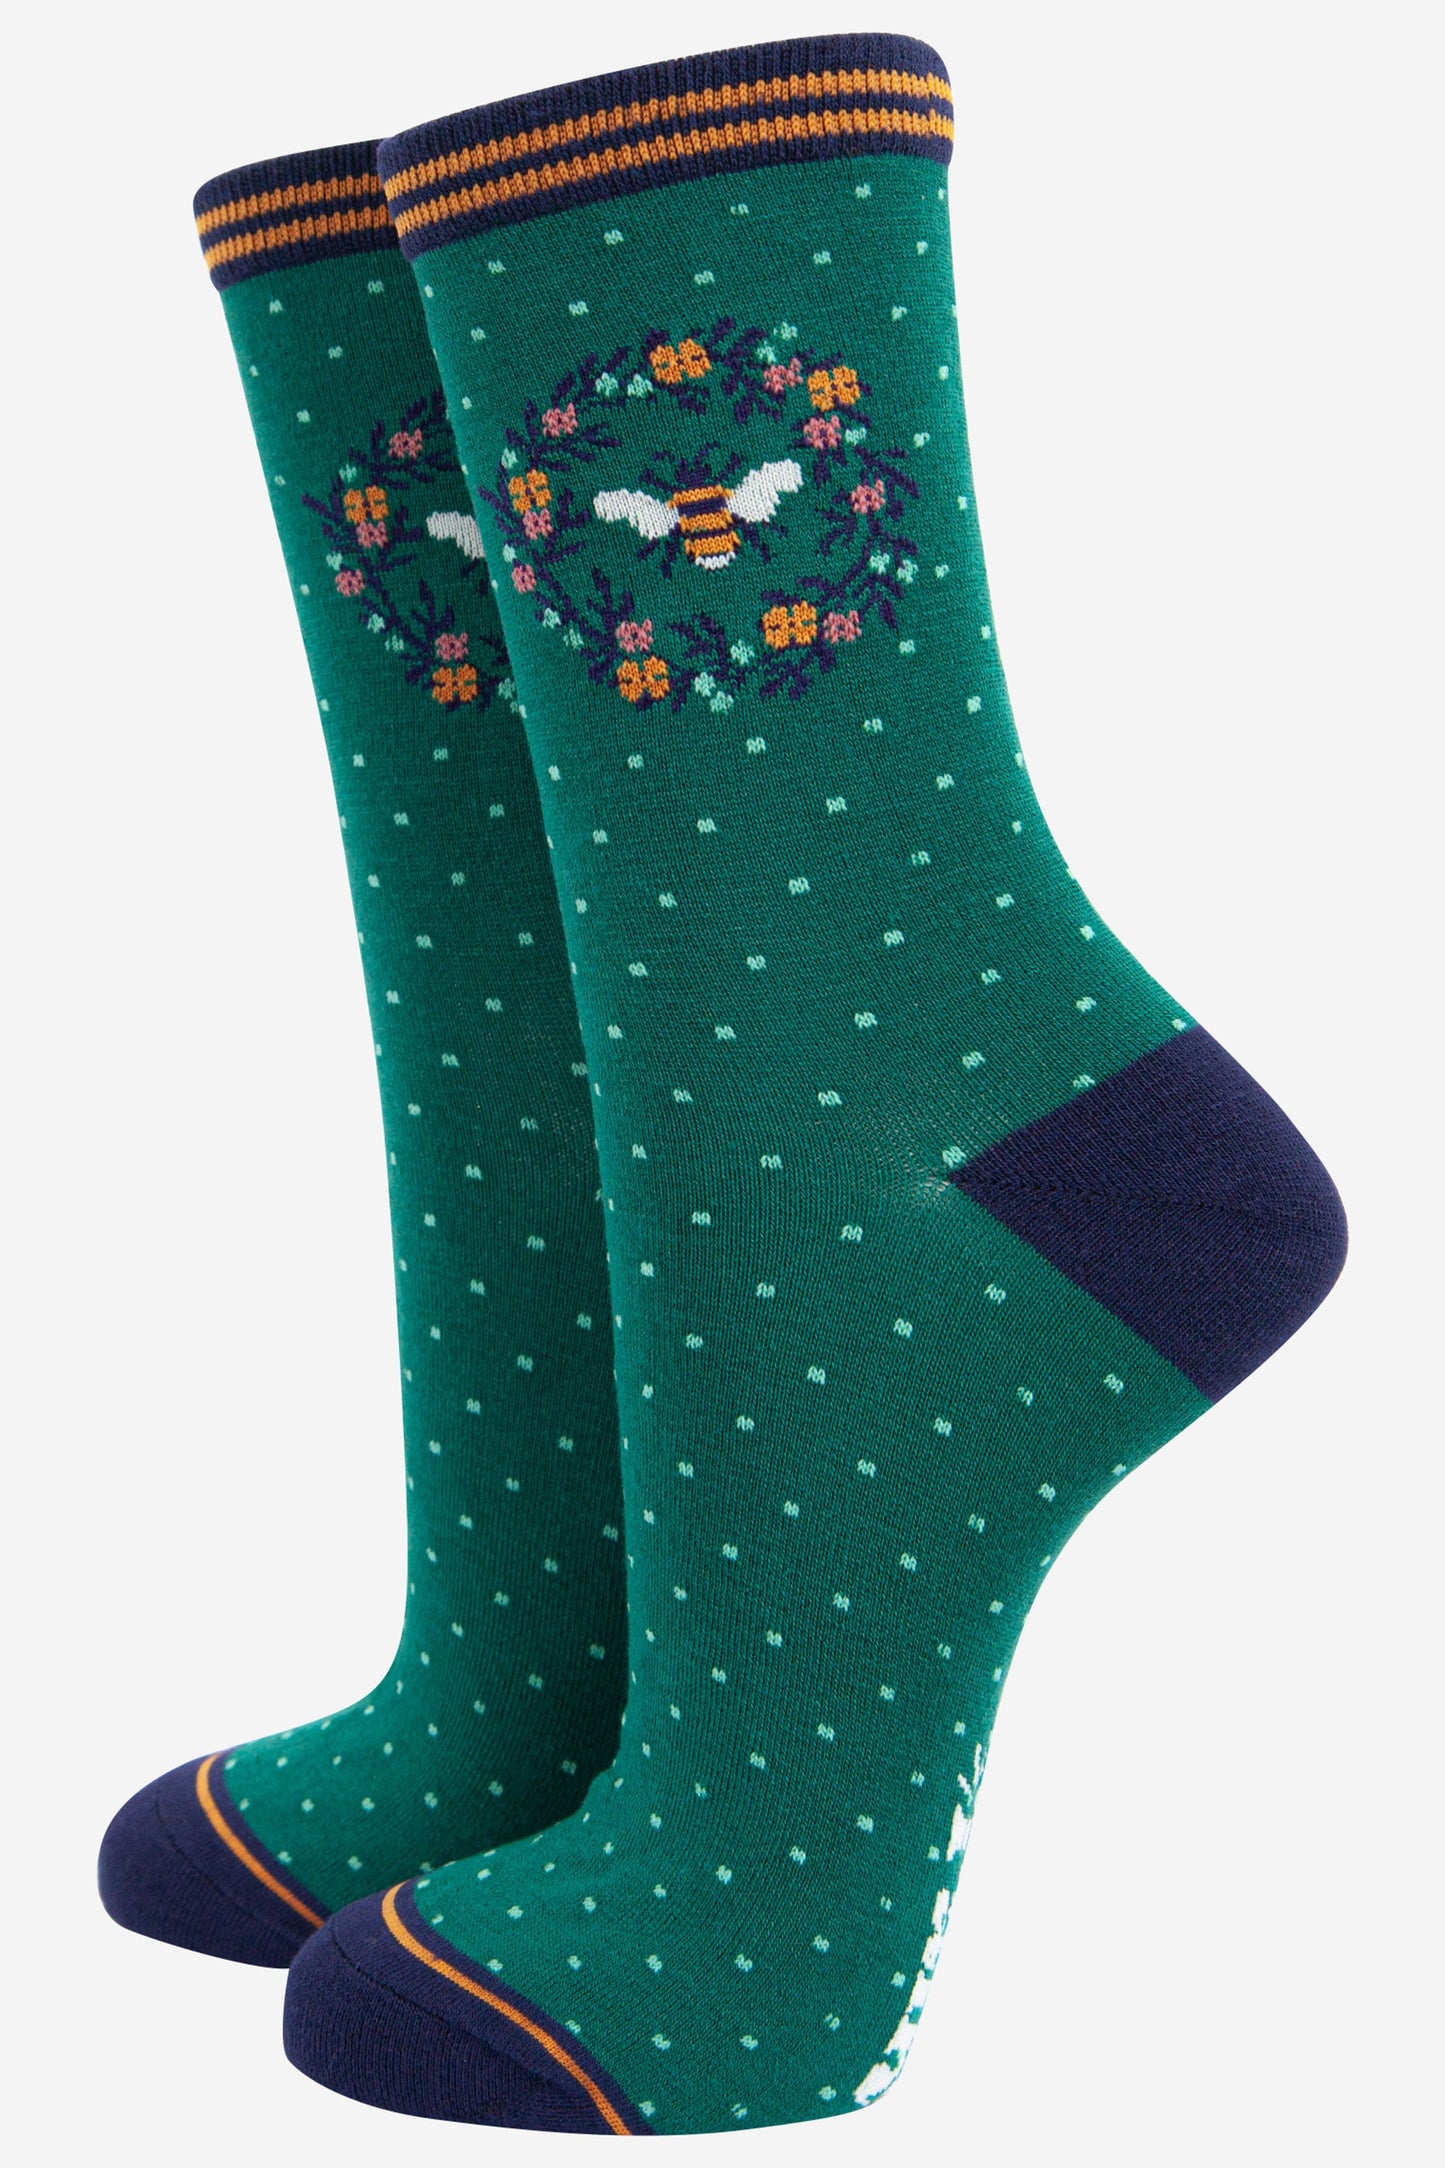 green and navy blue ankle socks featuring a large bumble bee in a floral wreath on the ankle